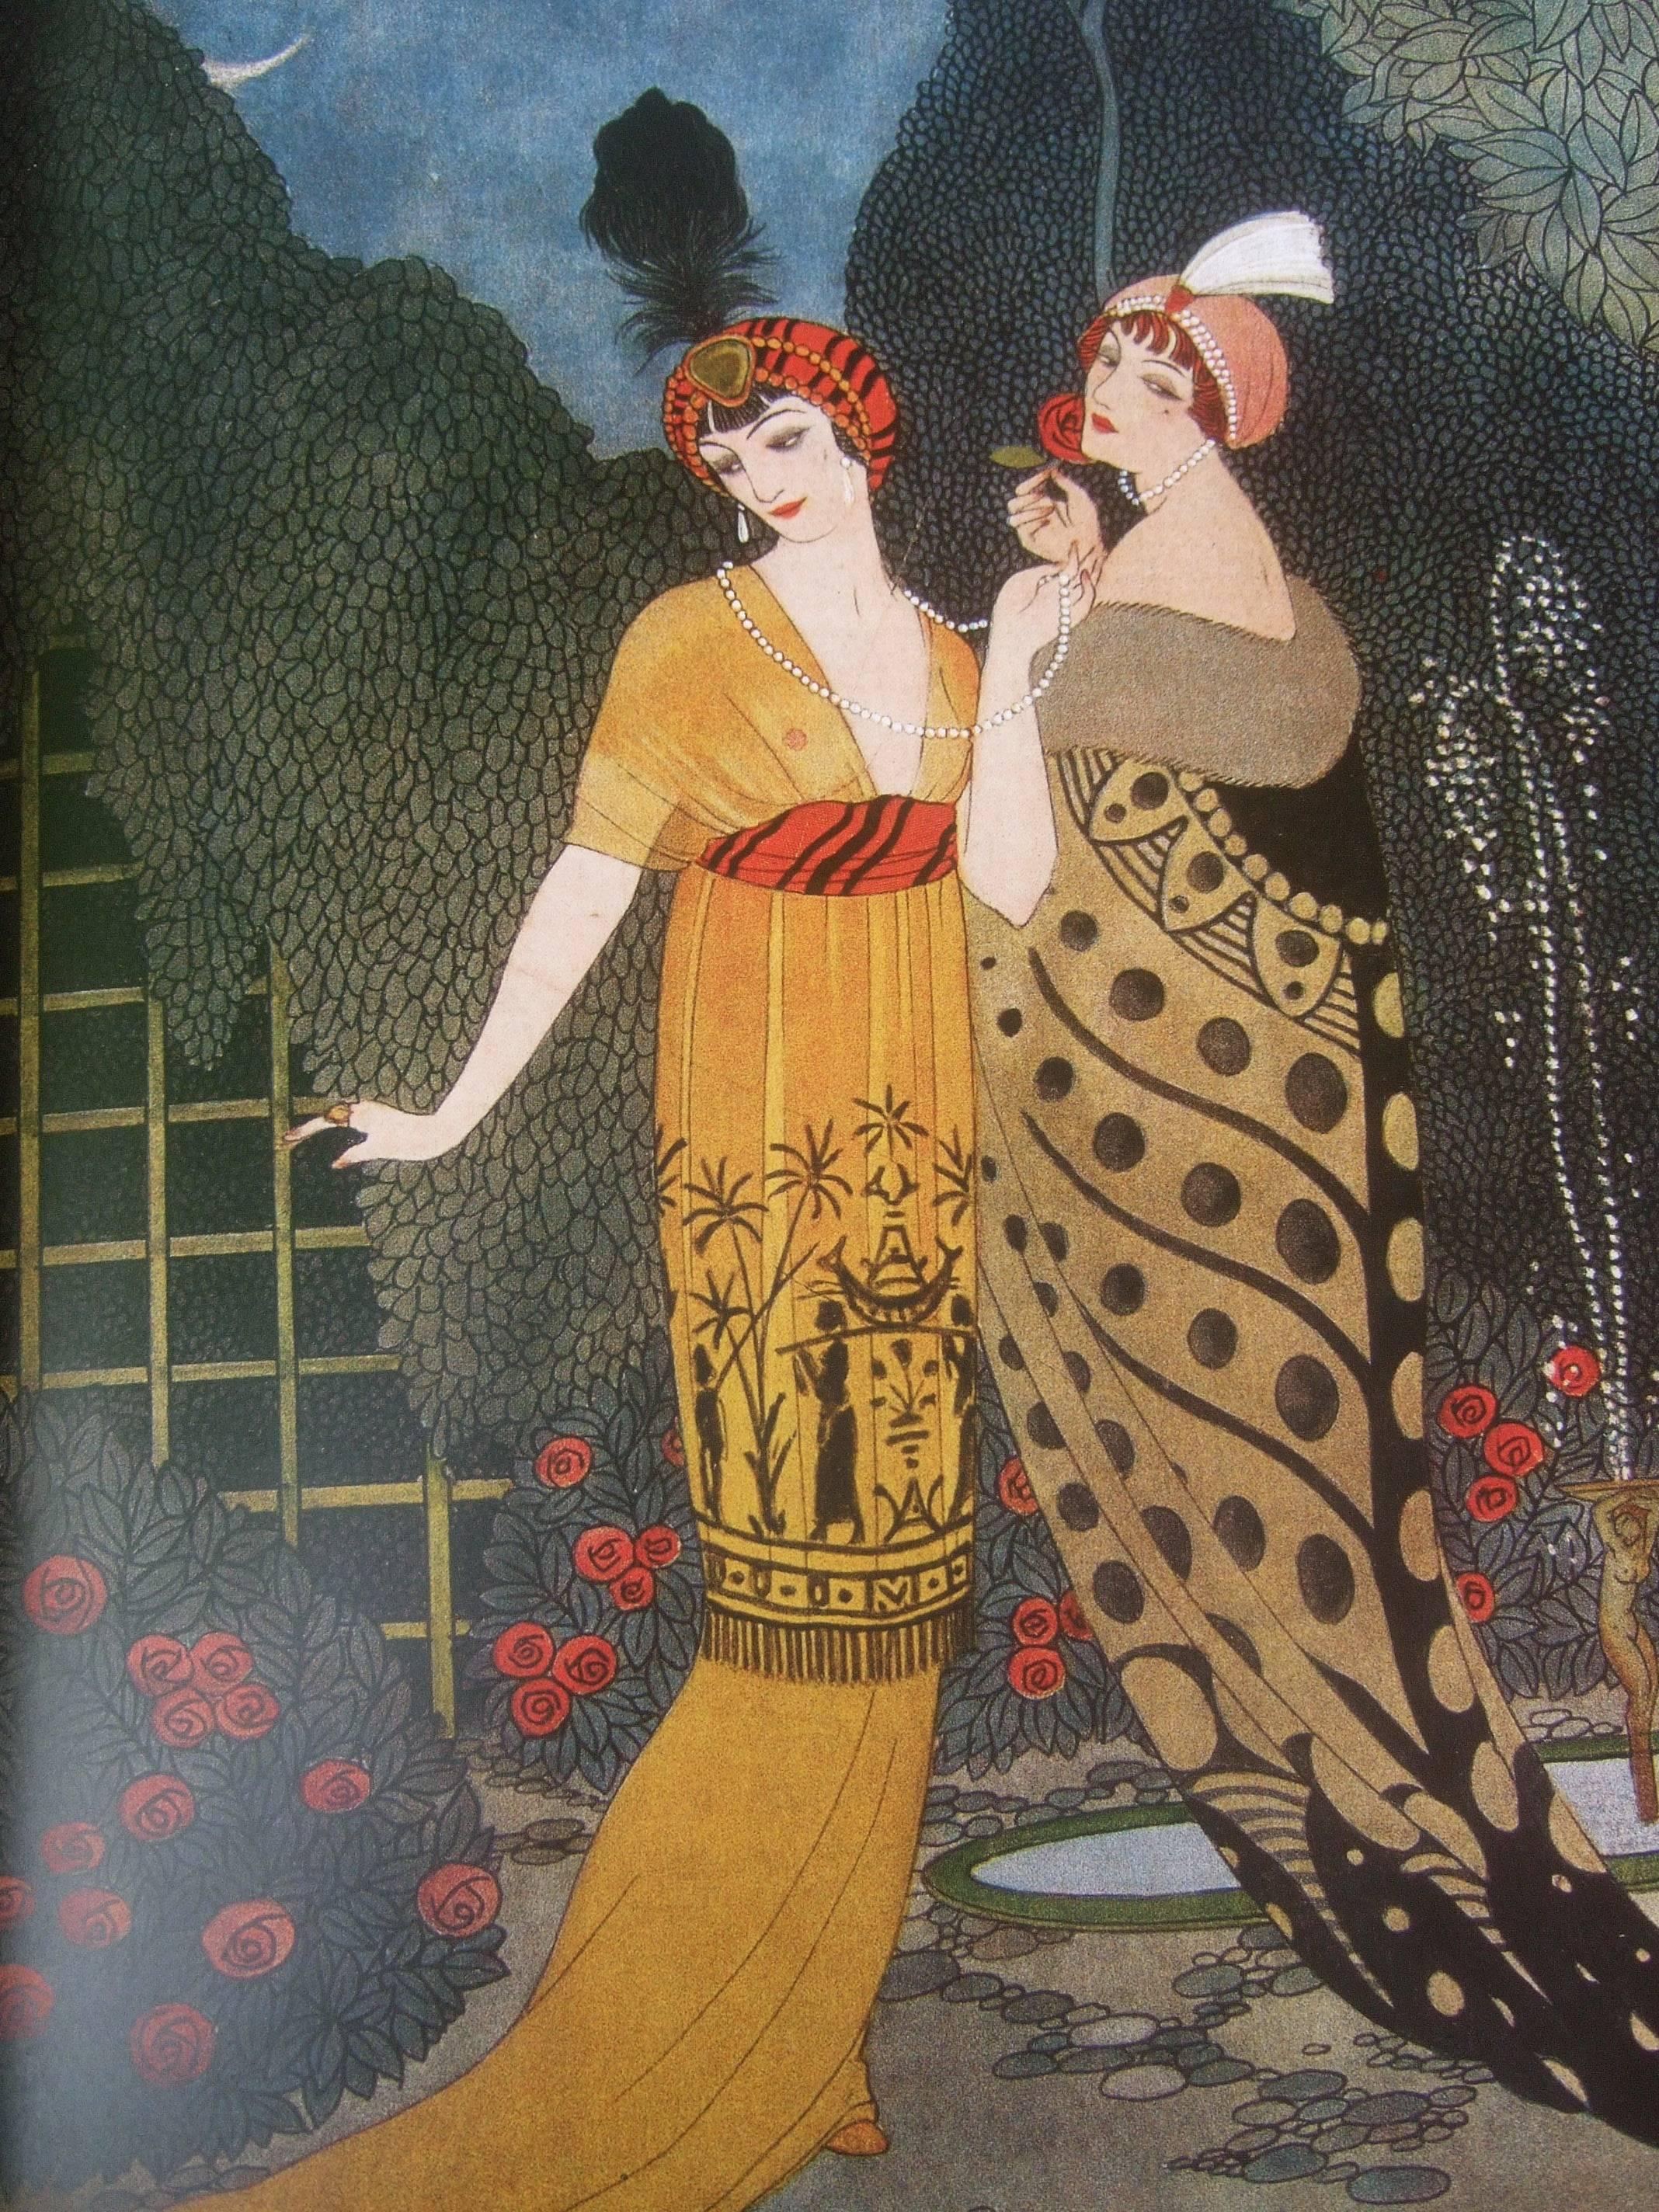 Paul Poiret Hardcover book of his incredible fashions 
The book features a myriad of his incredible early 20th 
century haute couture garments 

Combined with an archive of illustrations of his beautiful
designs. His couture designs dominated the